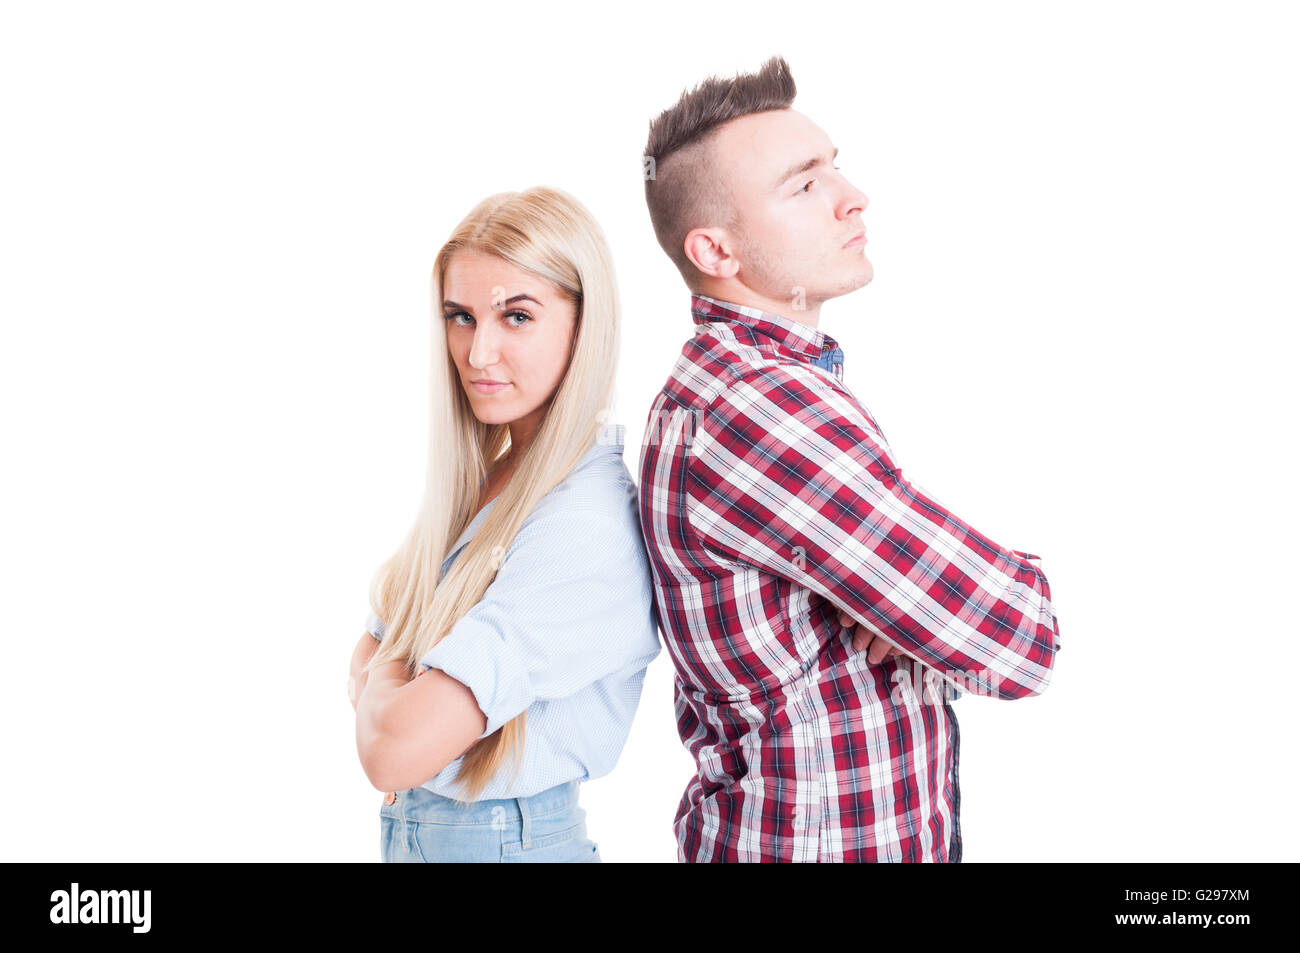 End of relationship, breakup or divorce concept with young and sad couple back to back Stock Photo